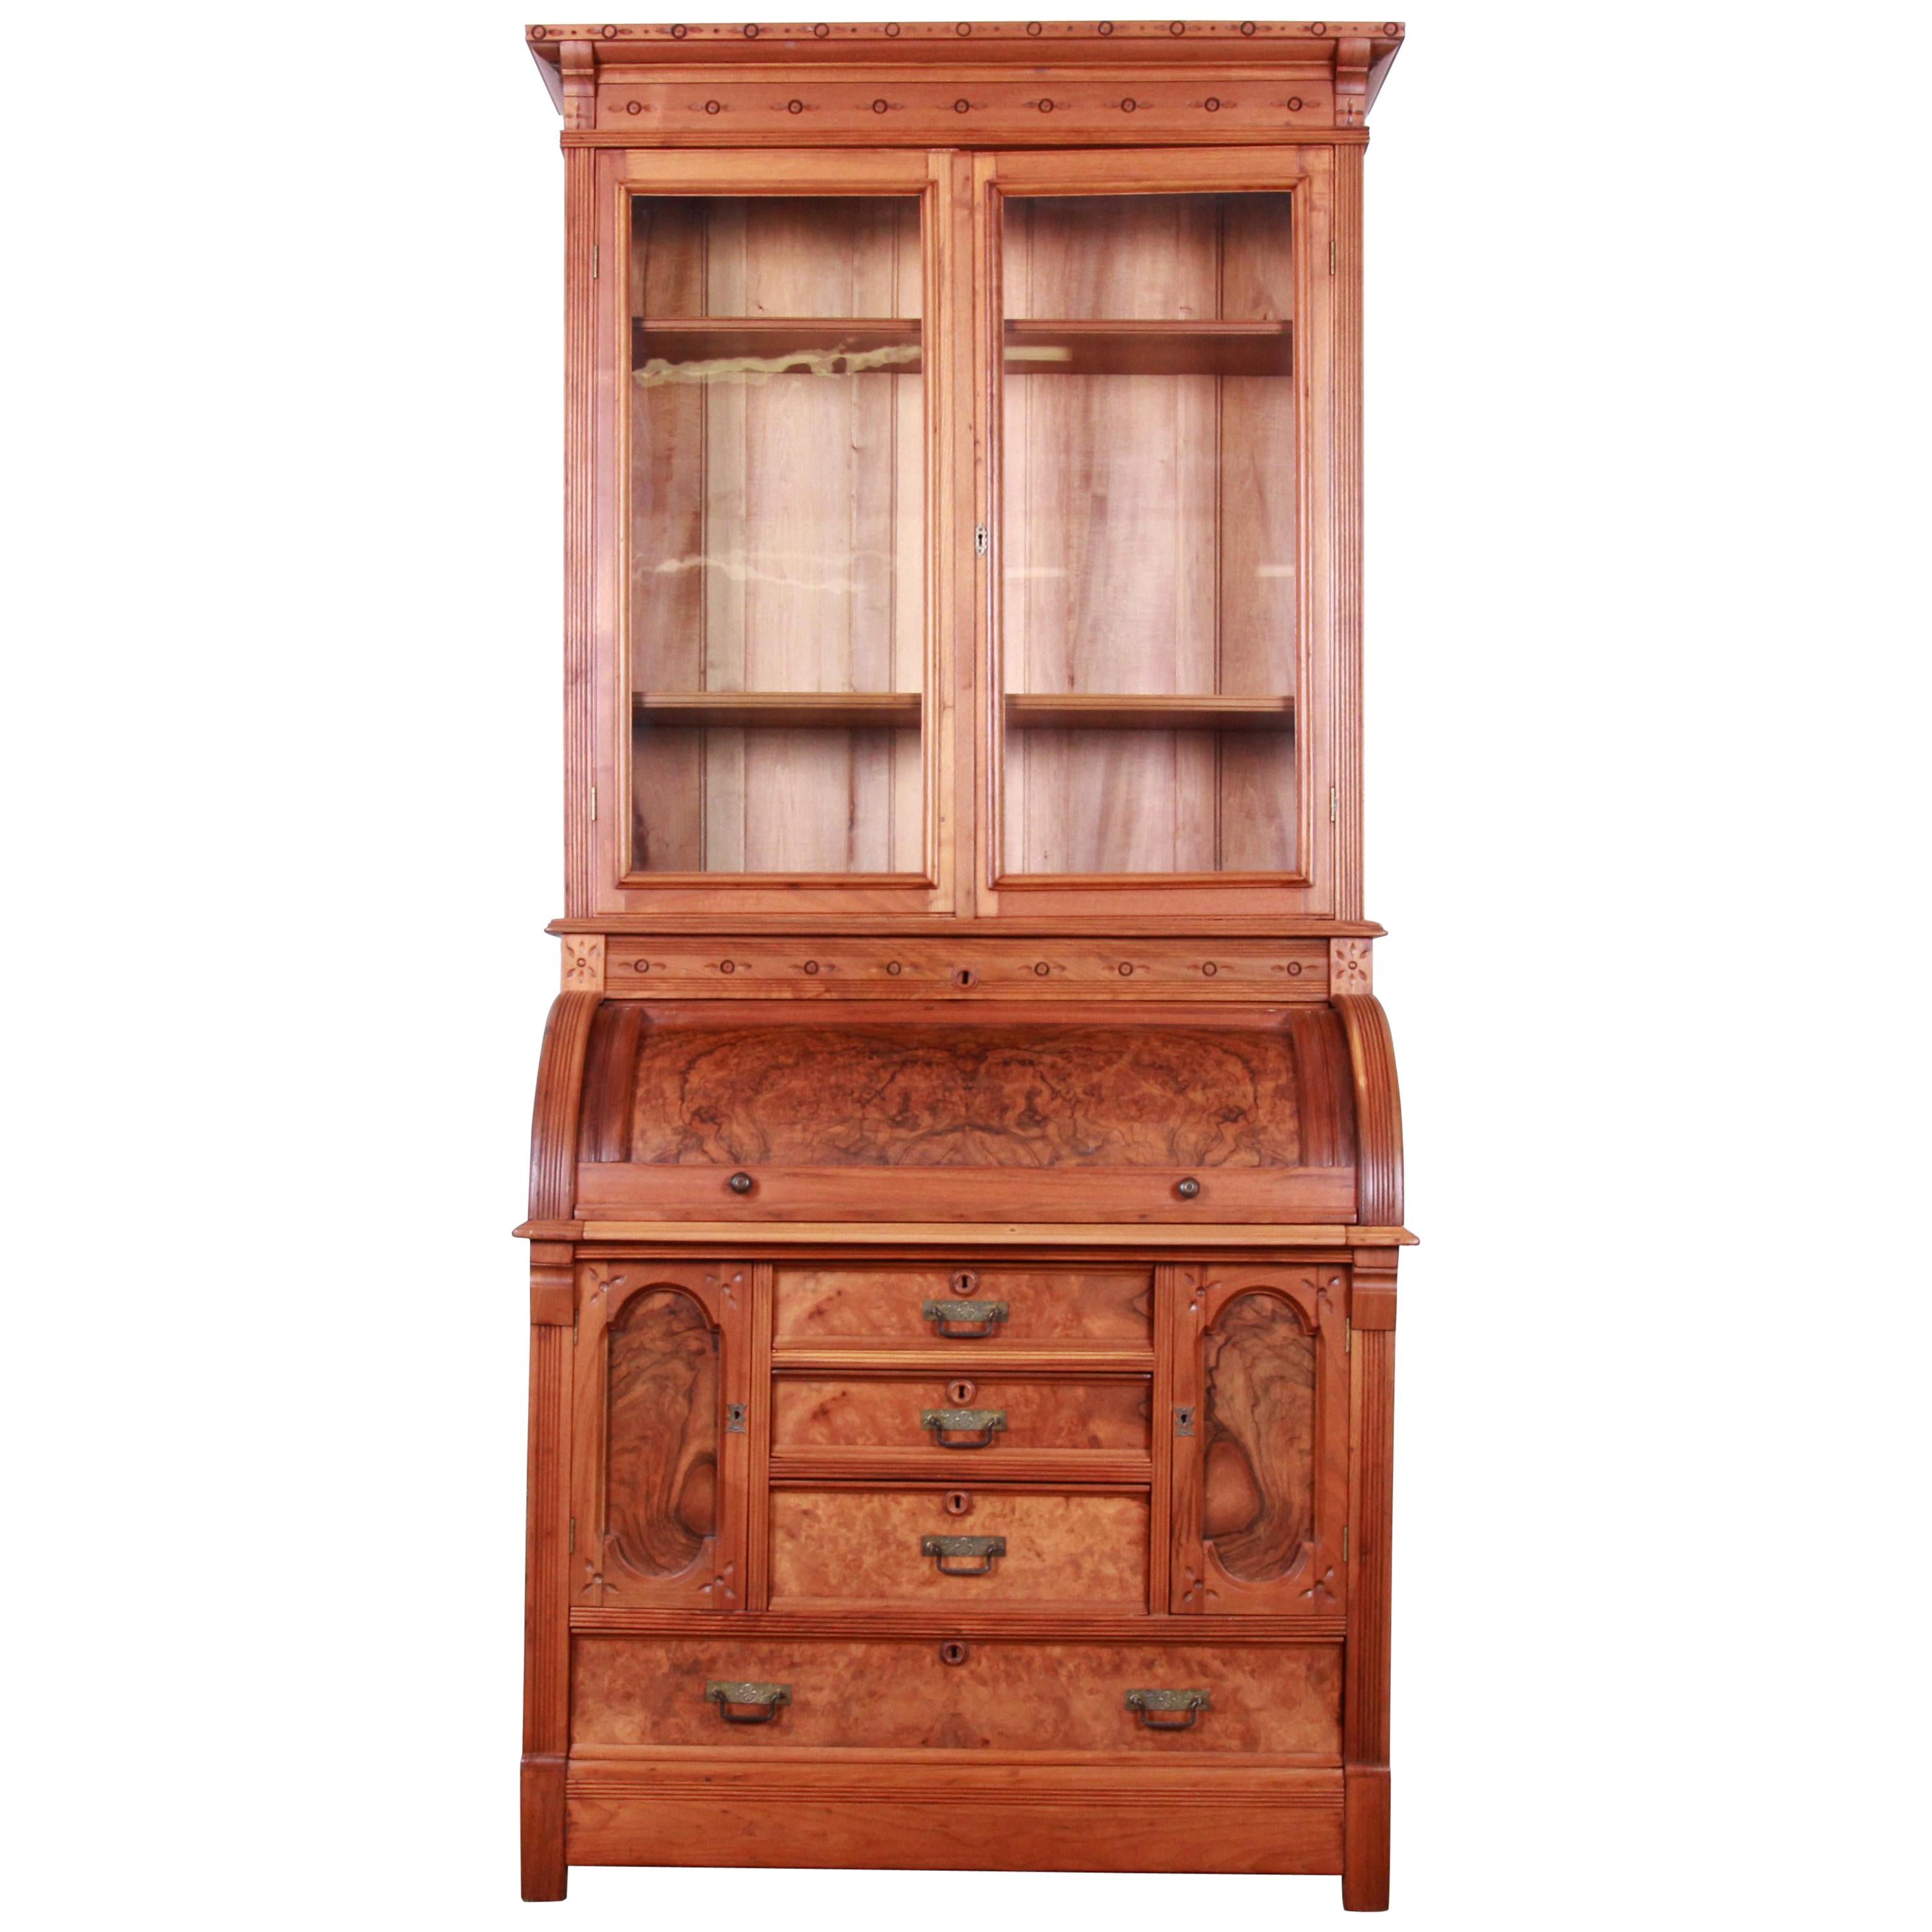 19th Century Eastlake Victorian Walnut and Burl Cylinder Desk with Bookcase